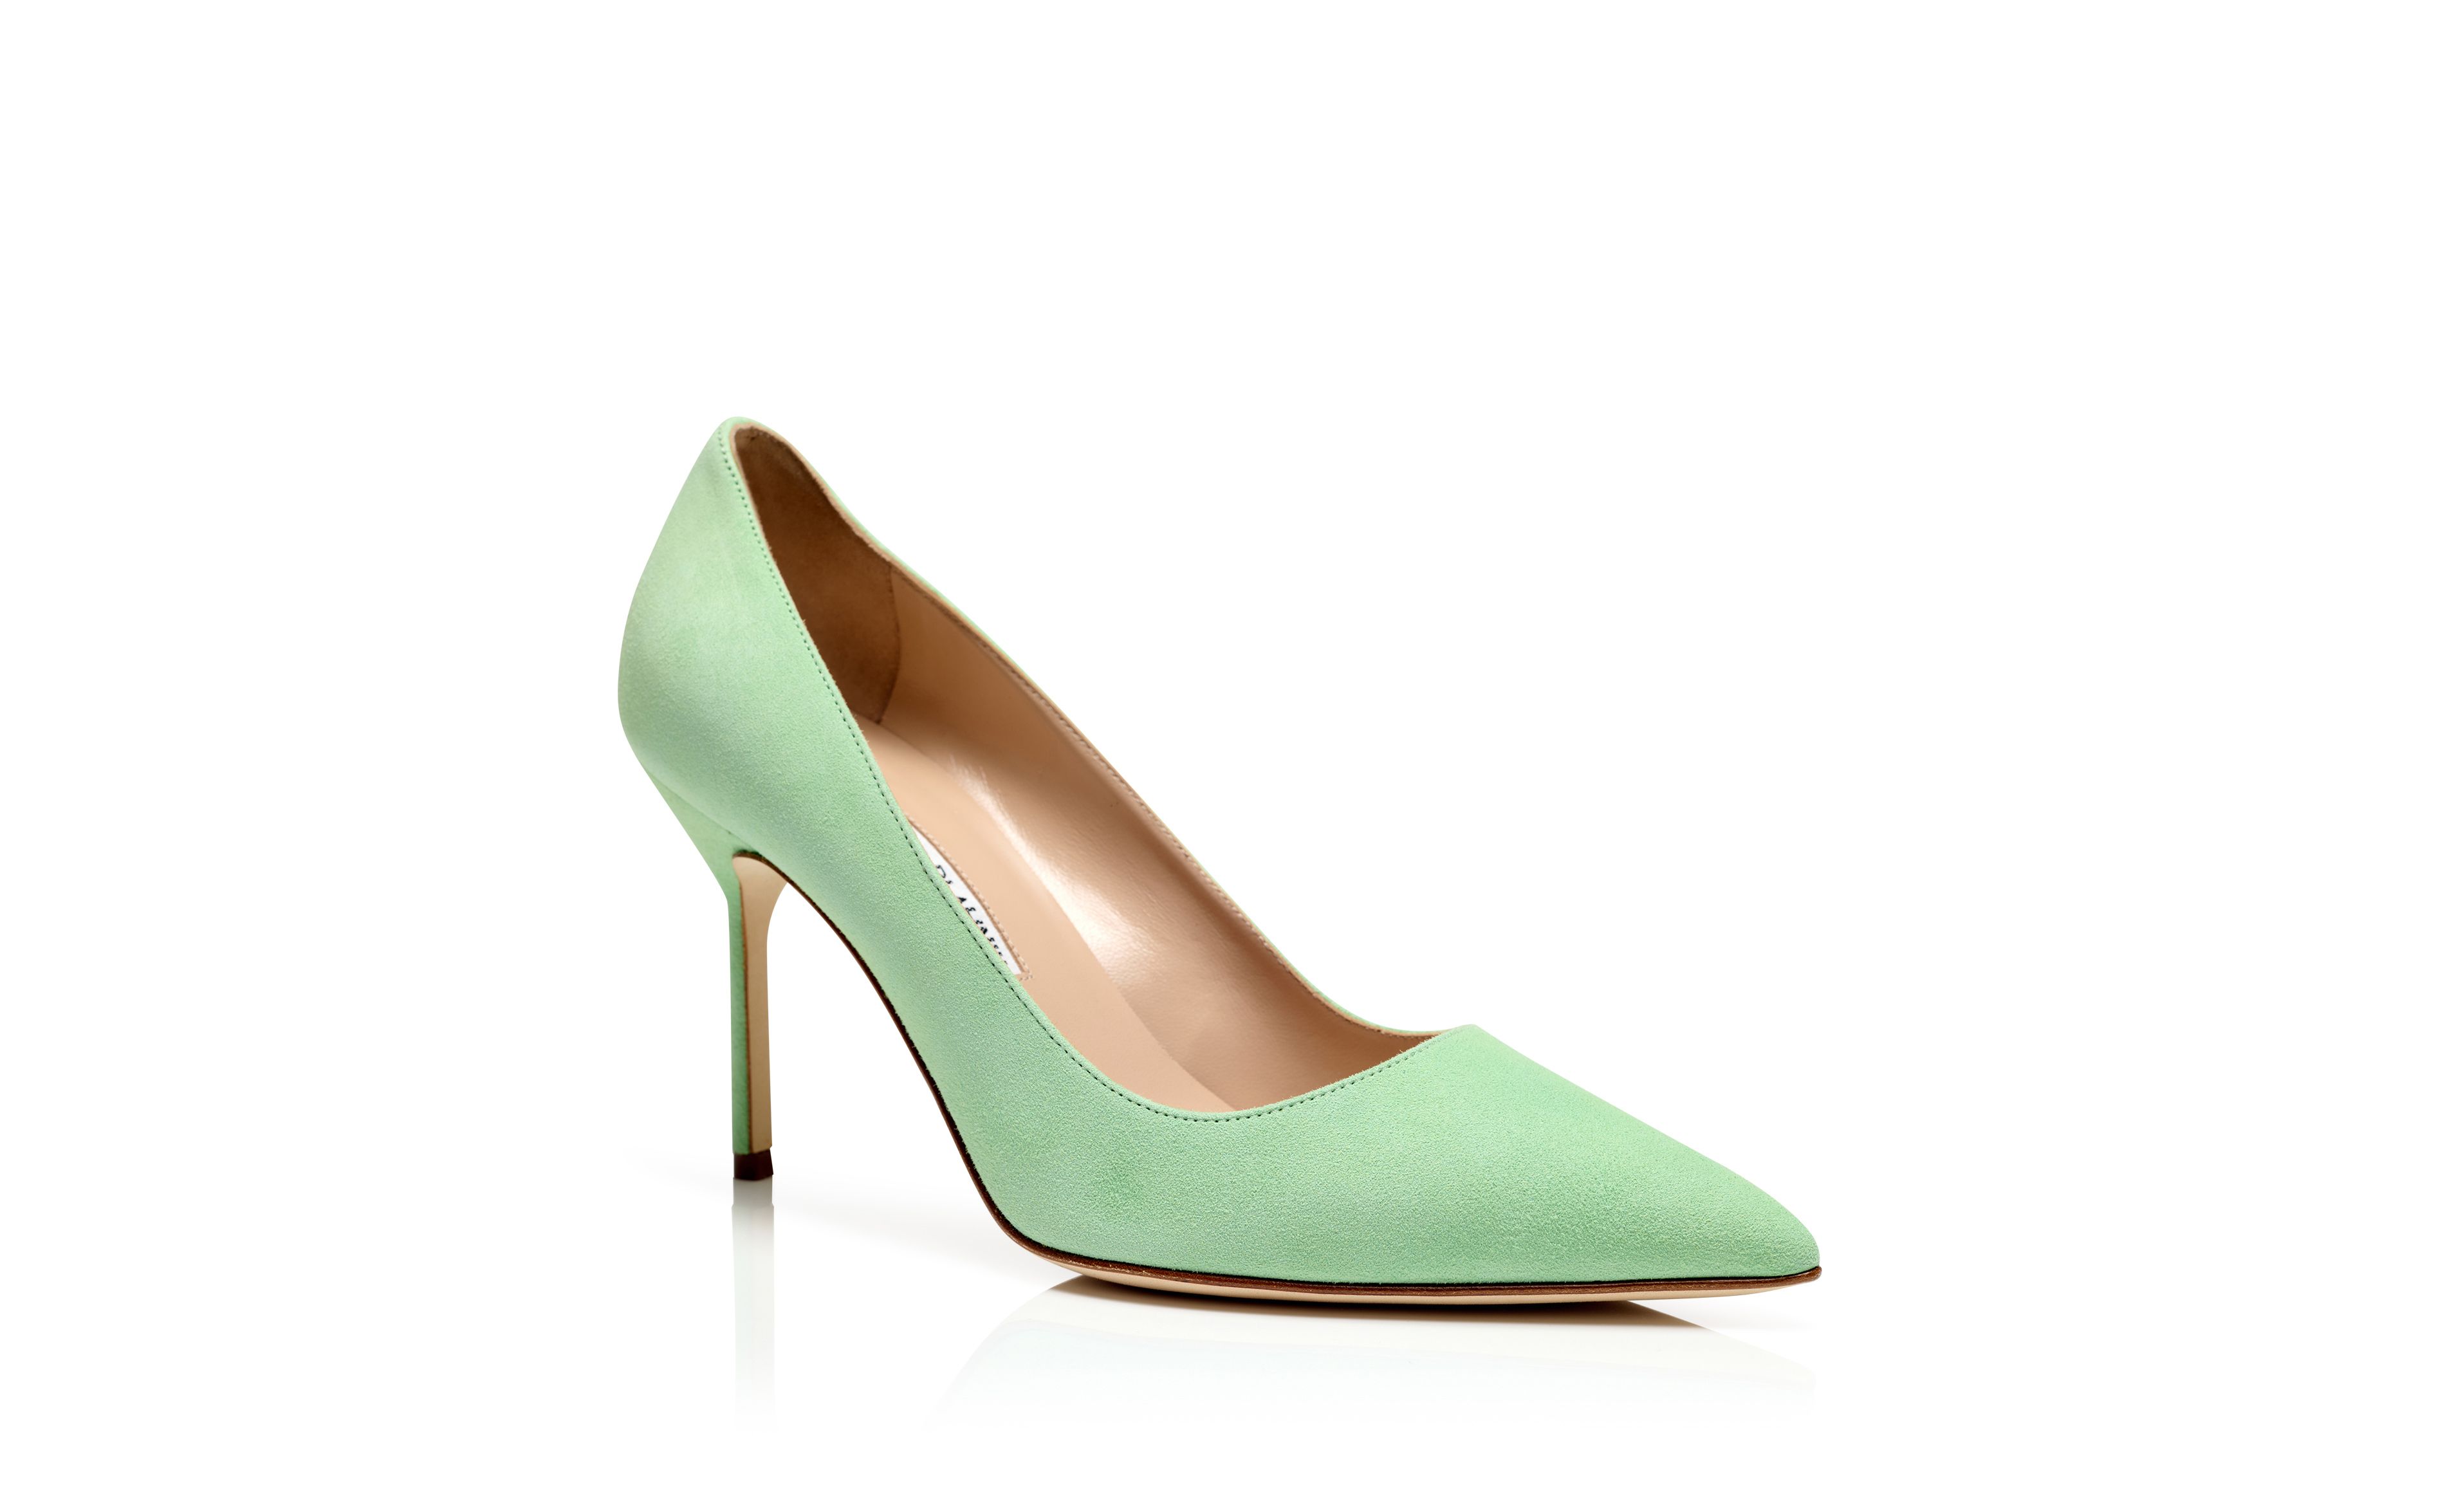 Designer Light Green Suede Pointed Toe Pumps - Image Upsell